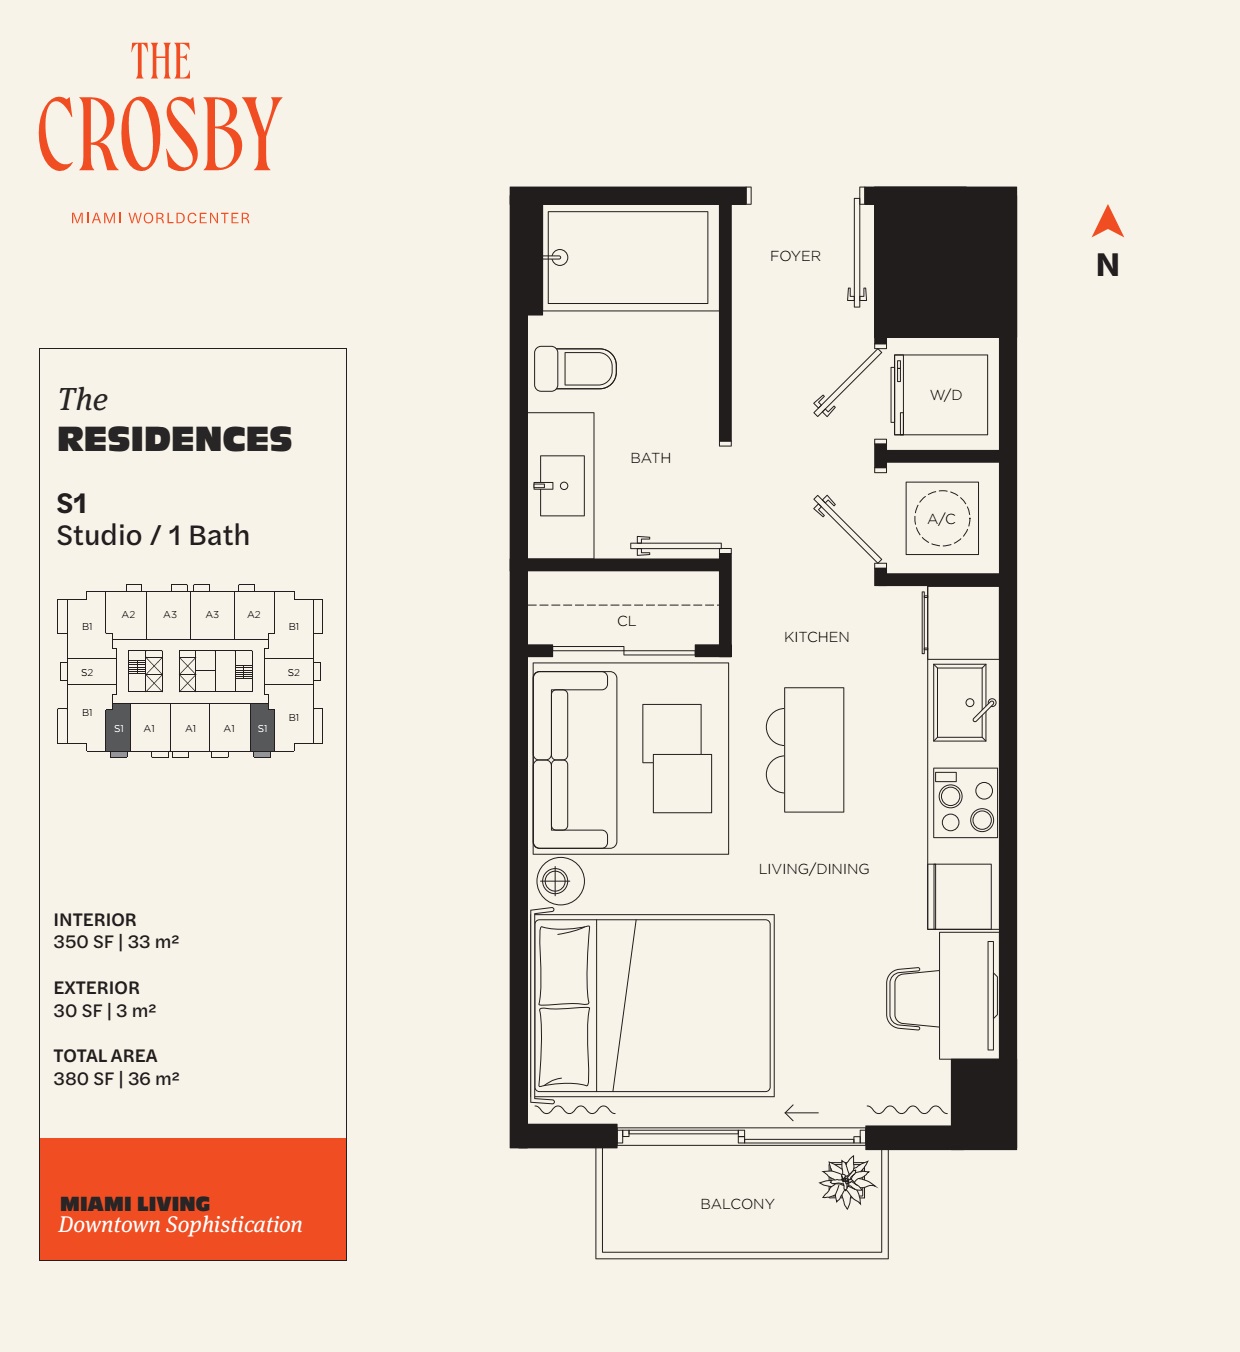 The Crosby Miami Worldcenter Residence S1